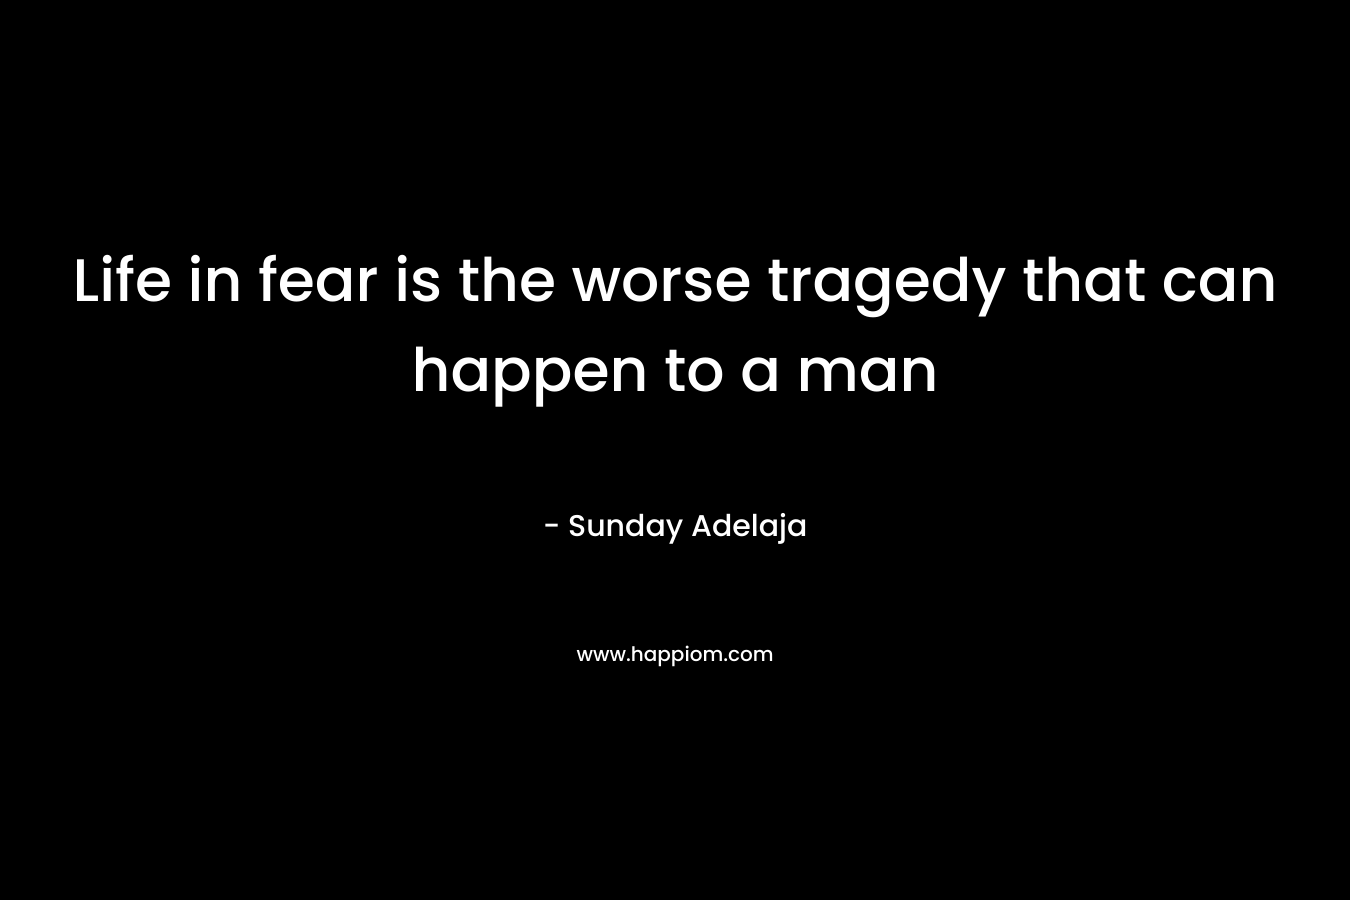 Life in fear is the worse tragedy that can happen to a man